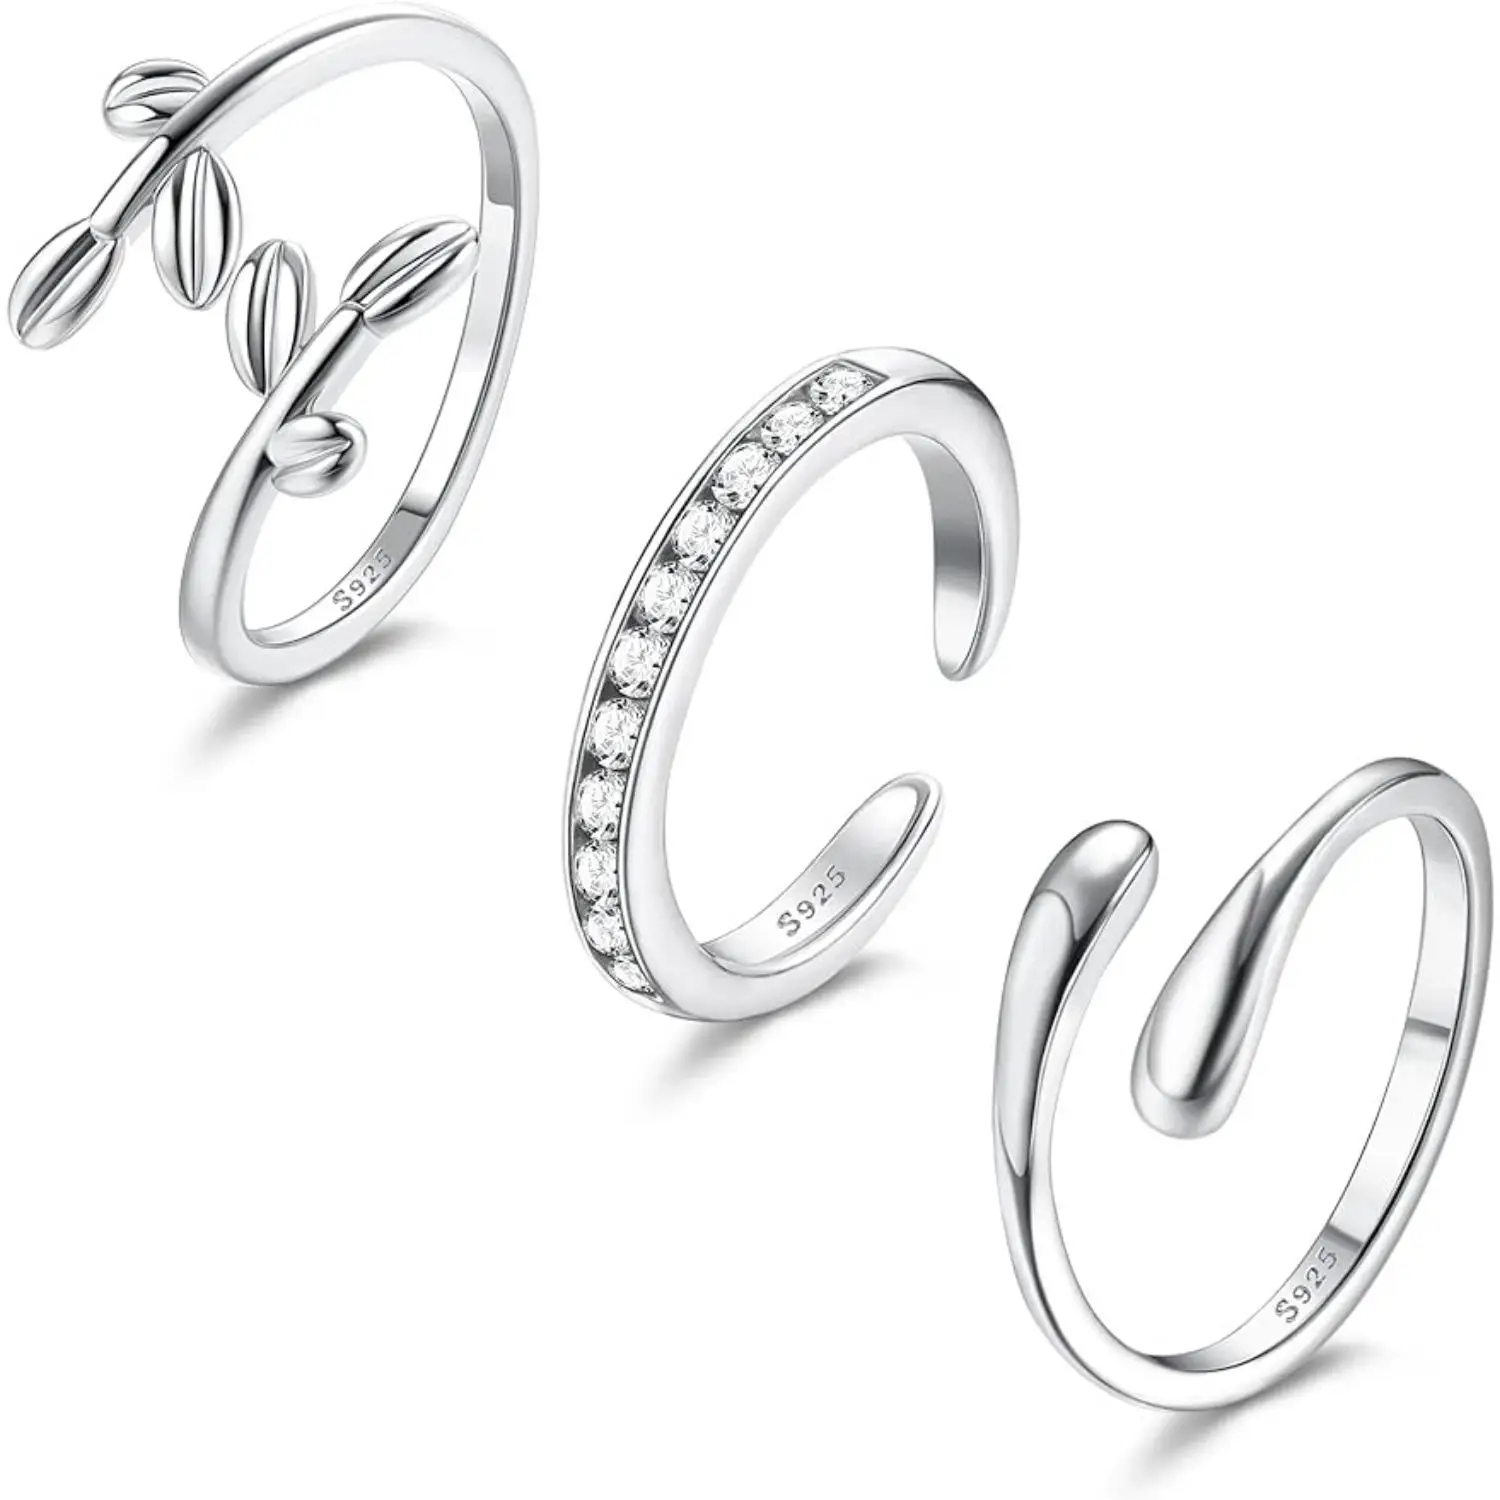 

Fansilver Sterling Silver Toe Rings for Women Adjustsable Toe Rings Set Platinum Plating Band Rings Trendy Summer Beach Sandals